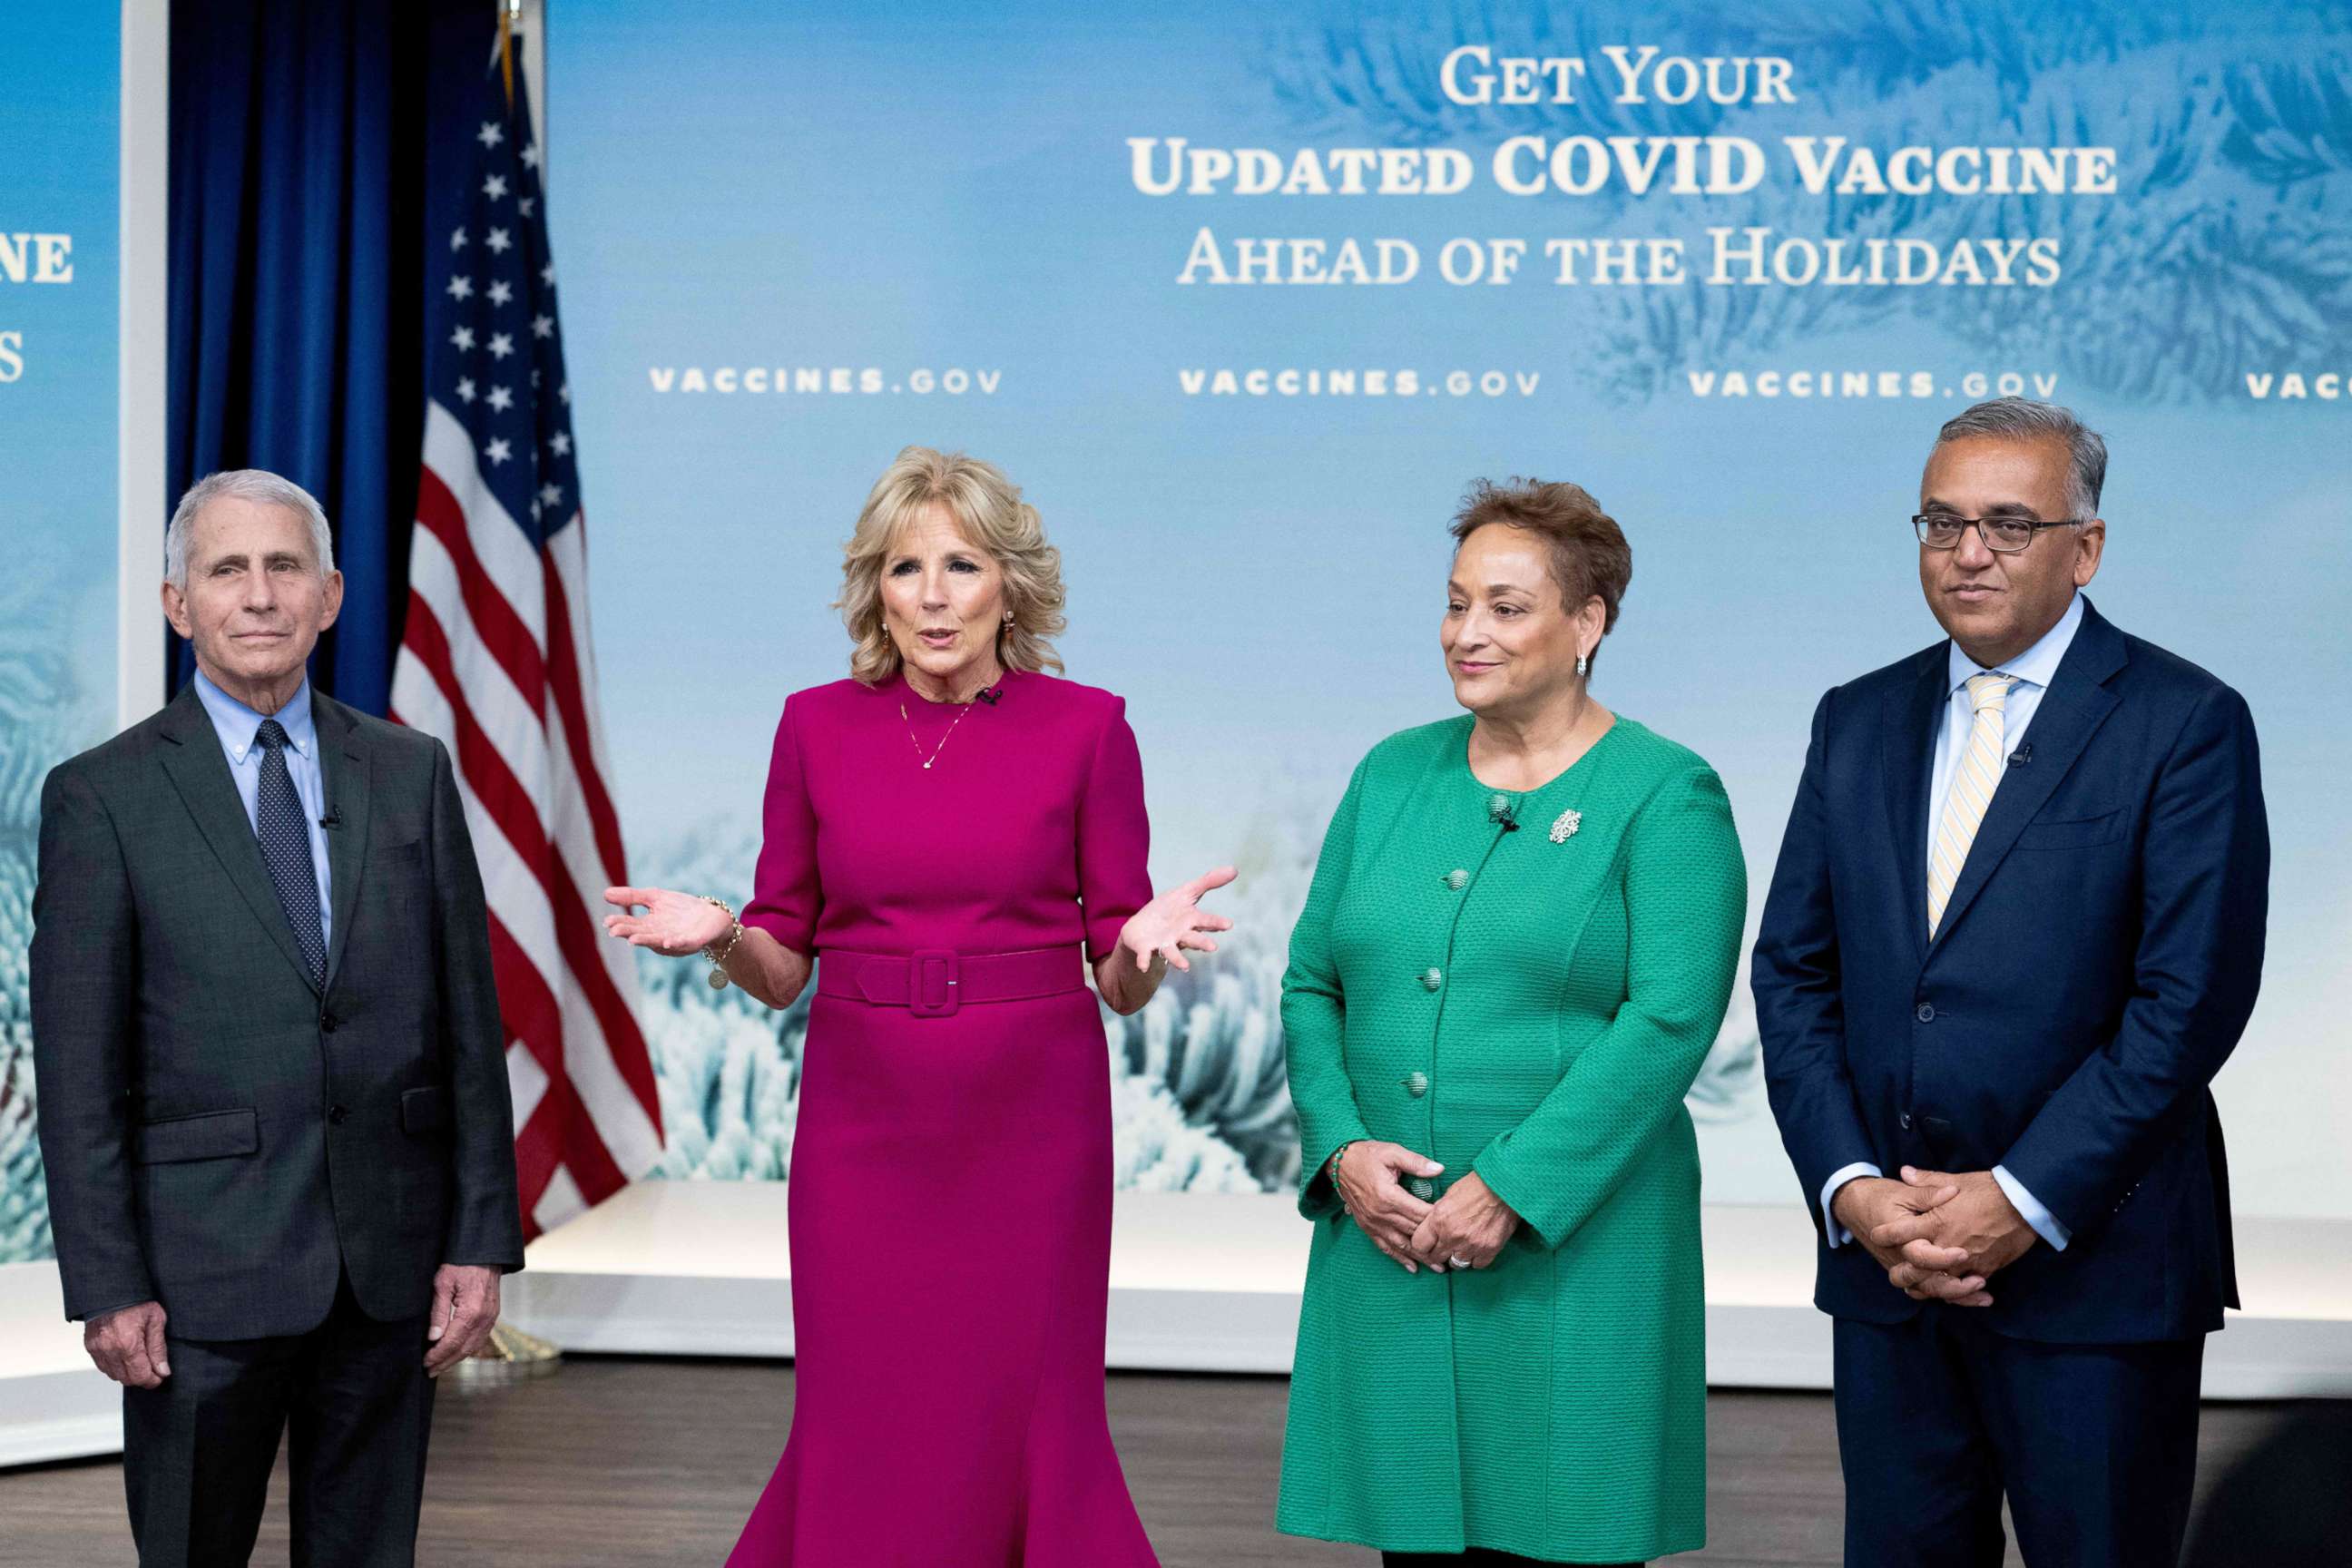 PHOTO: First Lady Jill Biden speaks about Covid vaccinations alongside Dr. Anthony Fauci, AARP CEO Jo Ann Jenkins (2nd R) and Dr. Ashish Jha (R) during a COVID-19 virtual event in the Eisenhower Executive Office Building in Washington, DC, Dec. 9, 2022. 